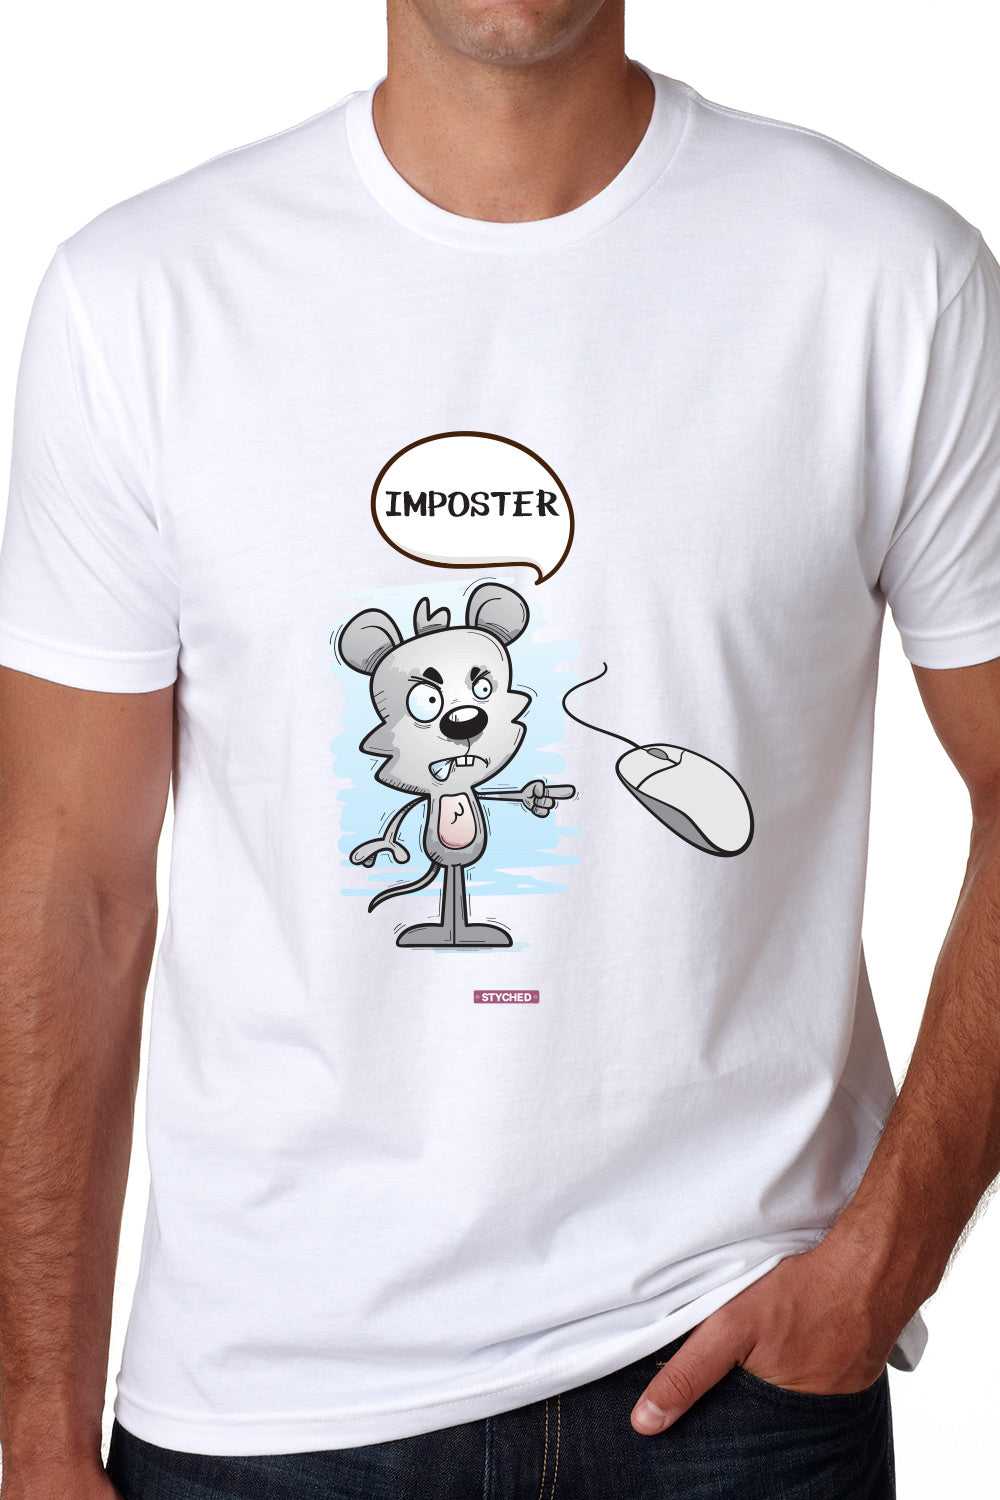 Imposter - Quirky Graphic T-Shirt White Color